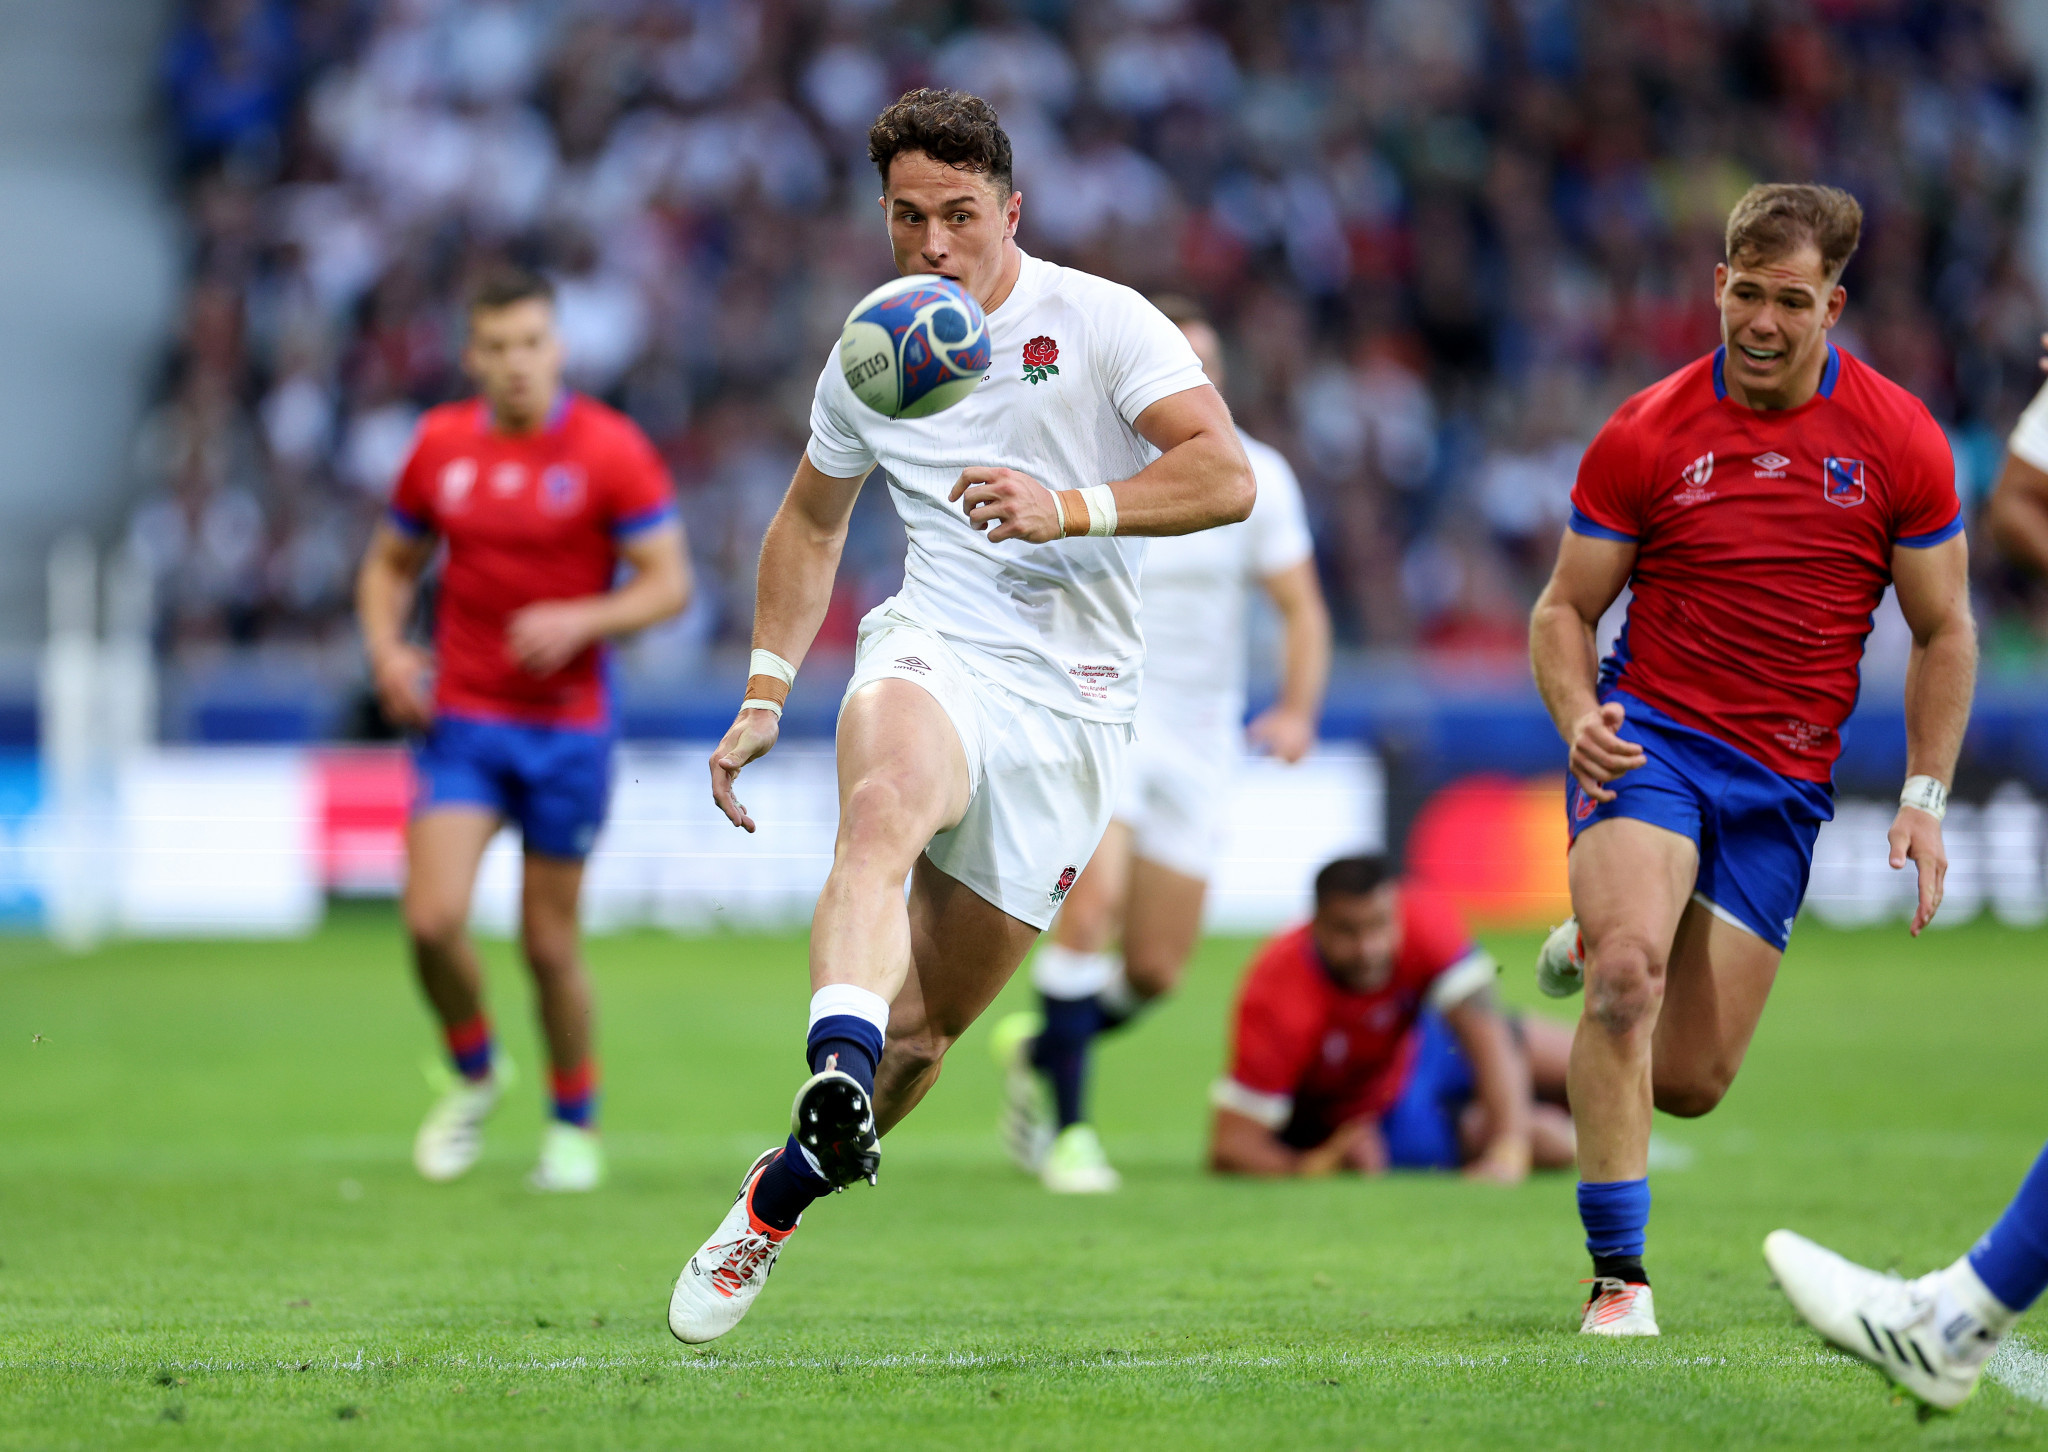 Henry Arundell scored five of England's 11 tries as they thumped Chile 71-0 ©Getty Images